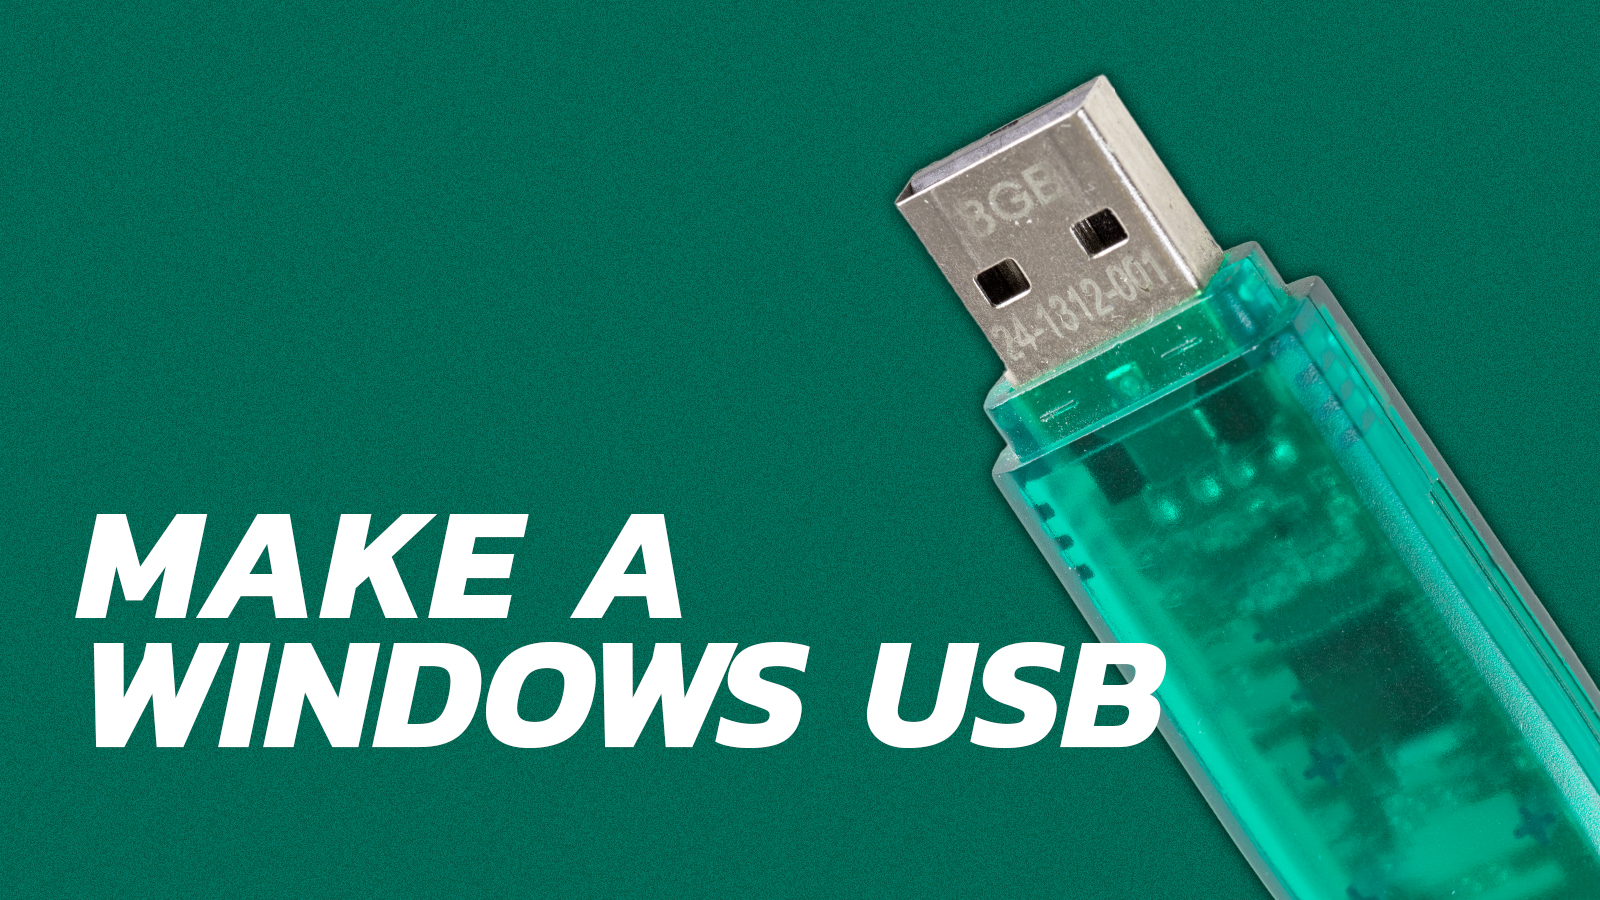 How to Install Windows 11 PRO, without Requirements, from USB